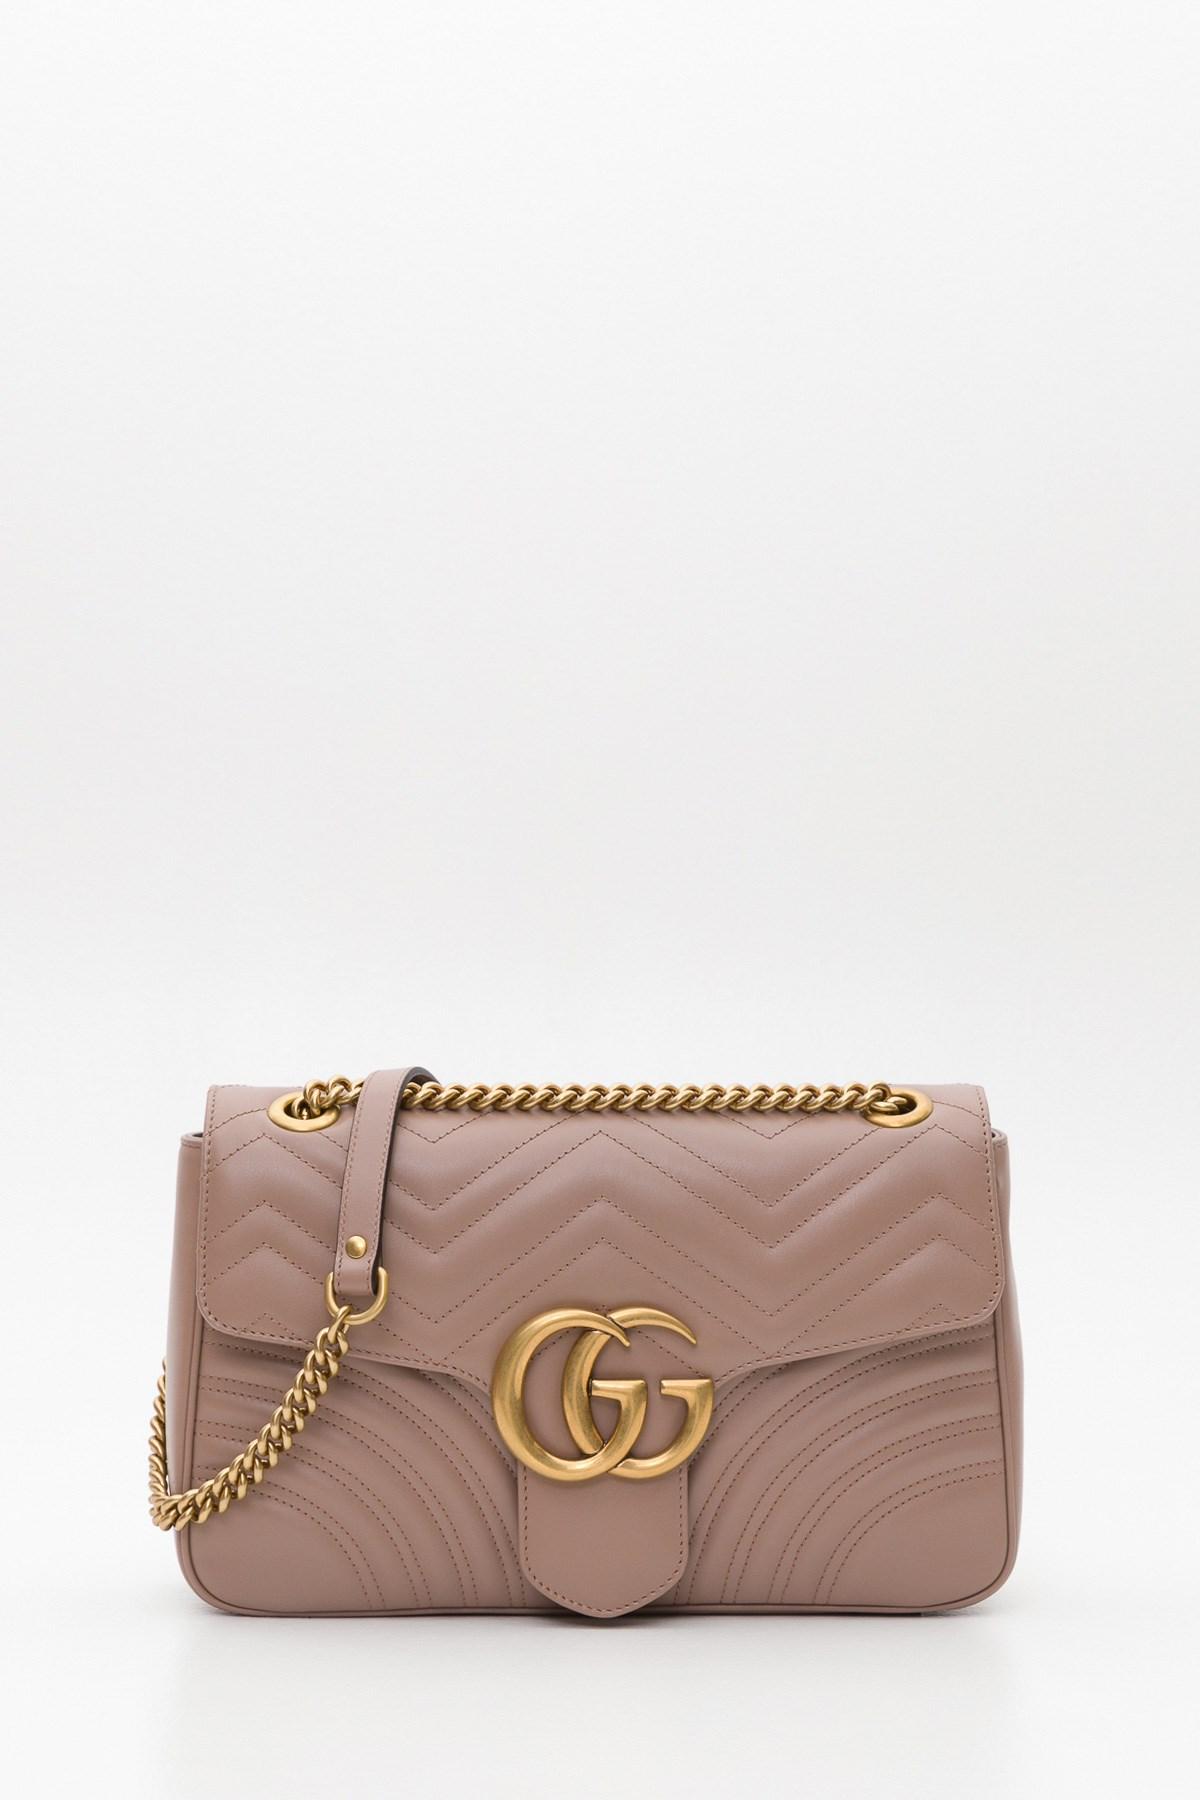 Gucci GG Marmont 2.0 Medium Shoulder Bag In Lion Trap. Ang Chev. Cuore 31 X  19 X 7 Cm in Natural | Lyst UK